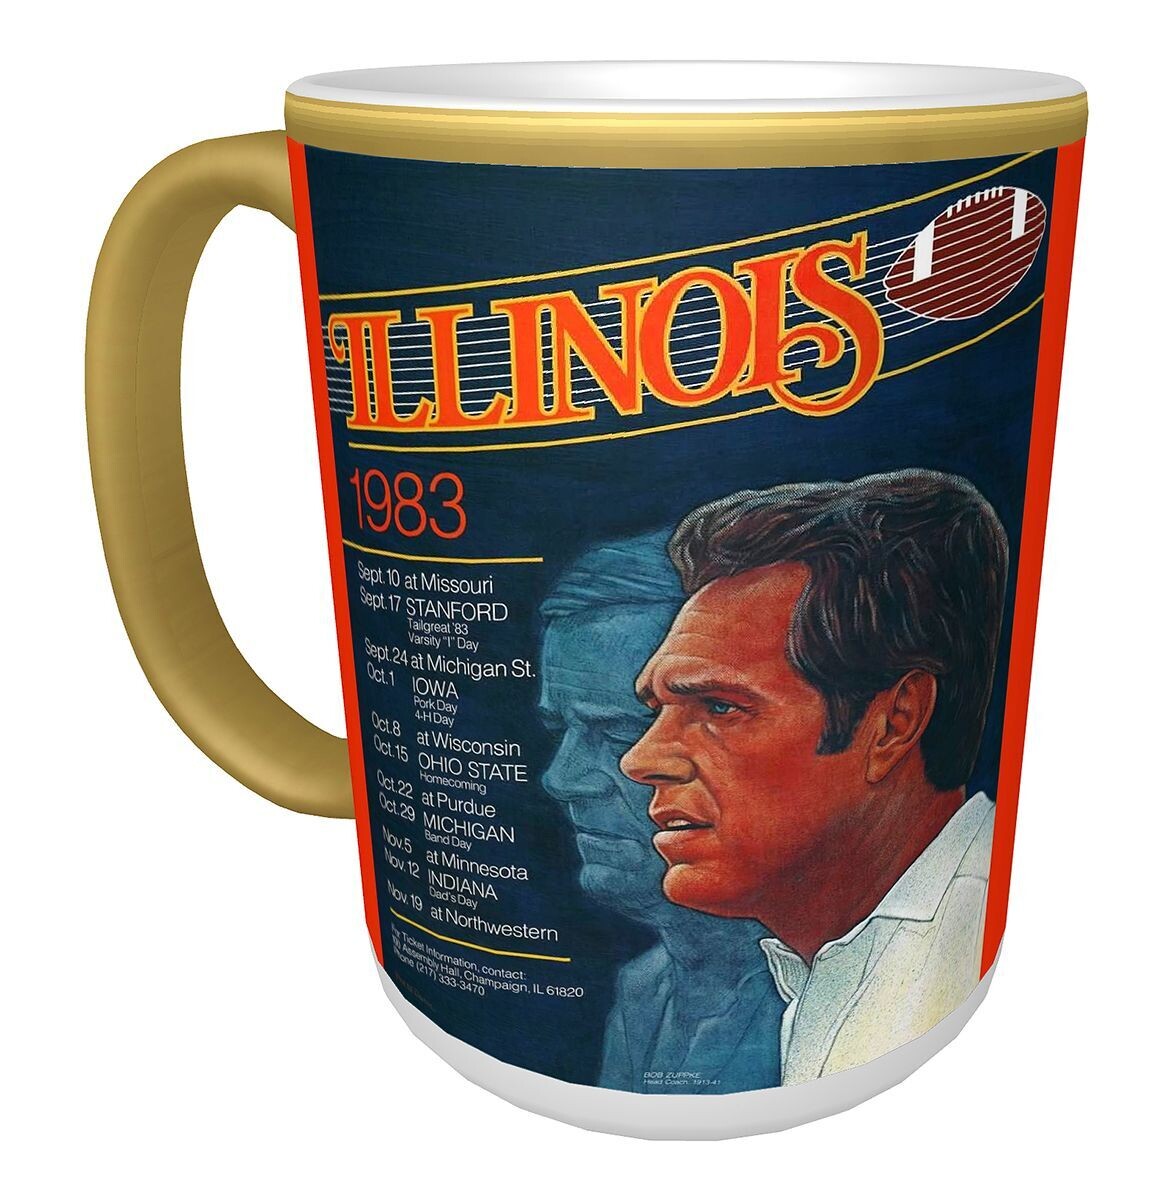 Item.X.03.15-Ounce Ceramic Mug featuring 1983 Illini Football Poster and 1984 Rose Bowl Poster